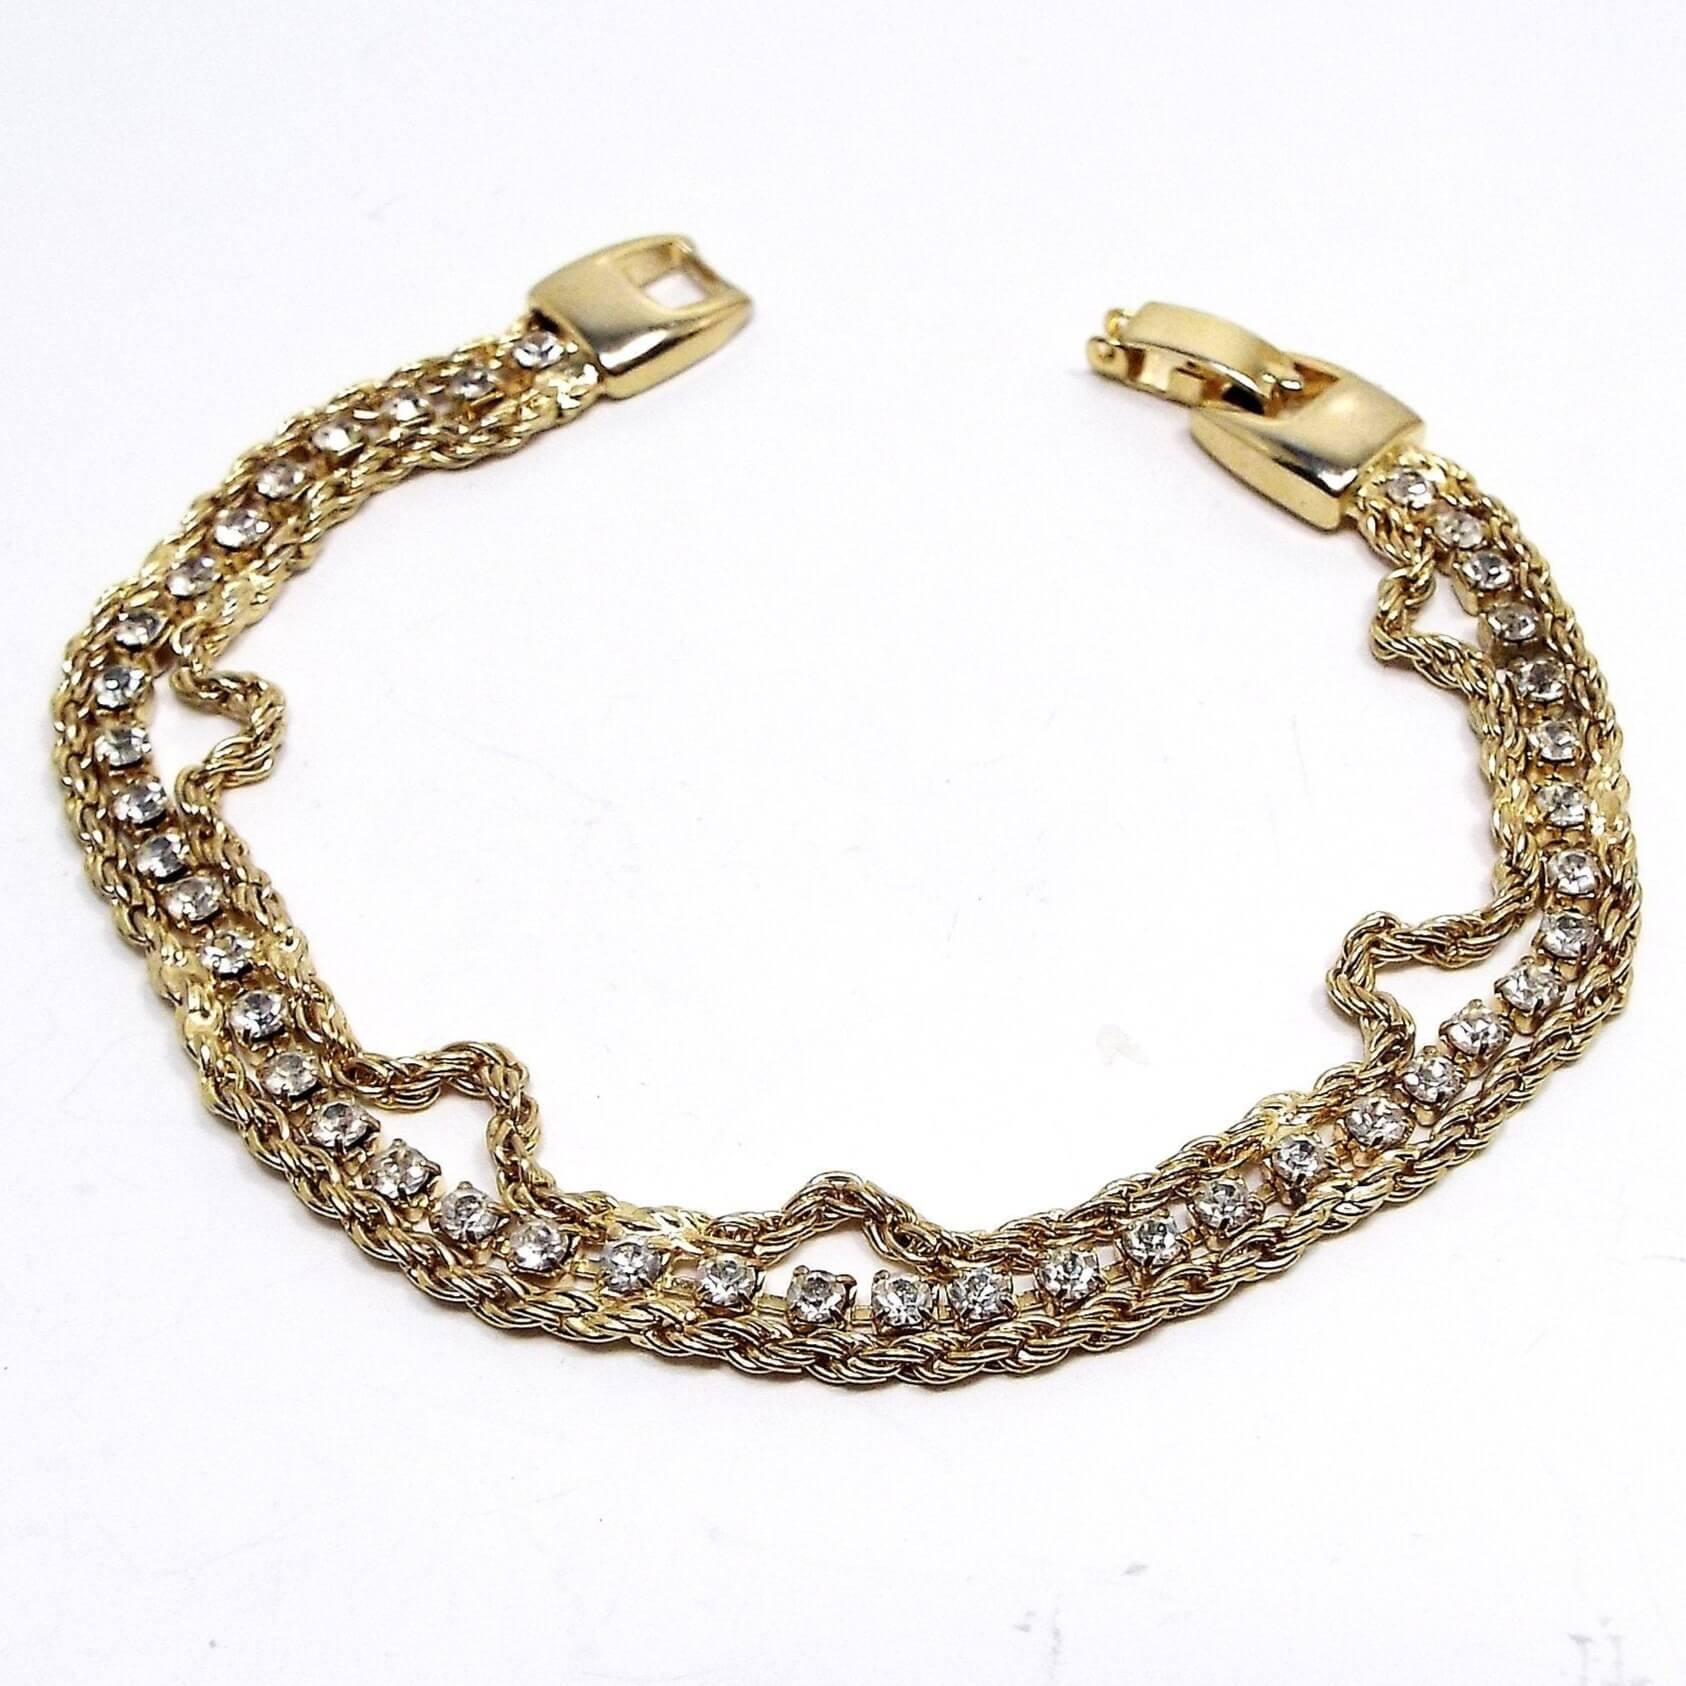 Top view of the retro vintage rhinestone bracelet. It is gold tone in color and has a strand of rhinestone cup chain in the middle with small round clear rhinestones. There is a strand of twisted rope chain on either side. 